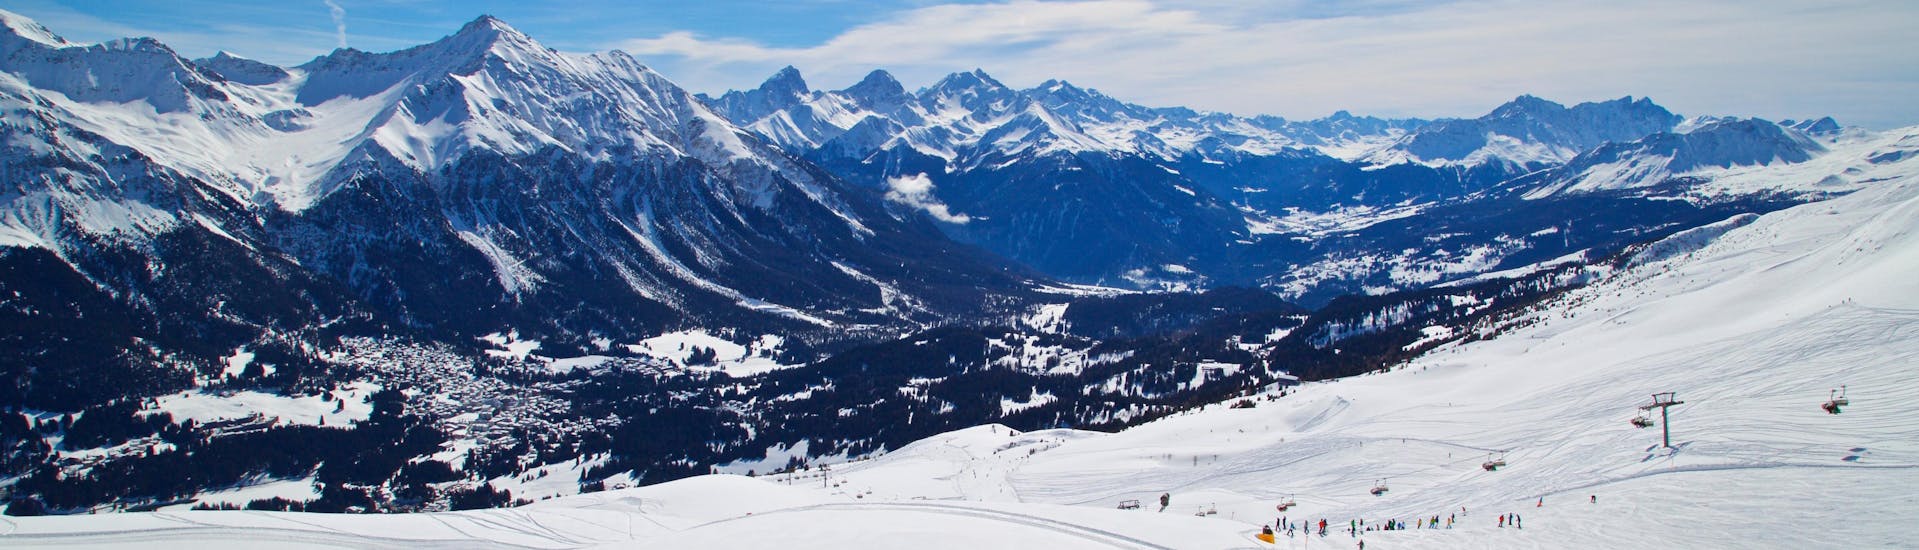 A panoramic view of the entire valley surrounding the popular swiss ski resort of Lenzerheide, where visitors can book ski lessons with one of the local ski schools.